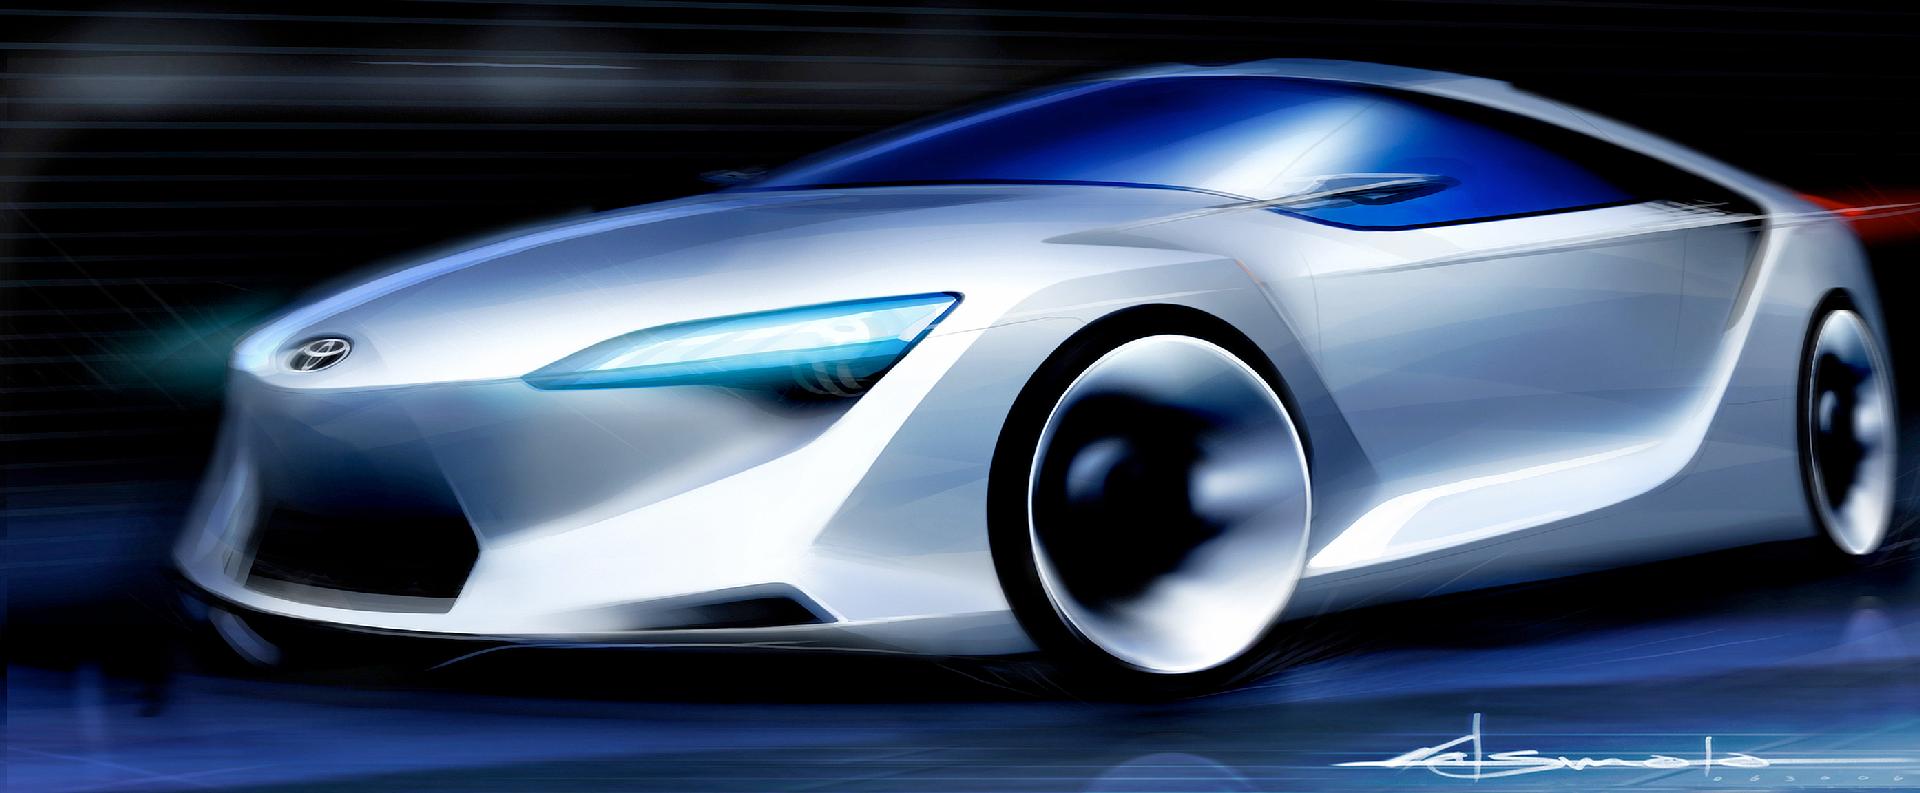 Toyota FT-HS concept (unveiled at the North American International Auto Show in 2007)